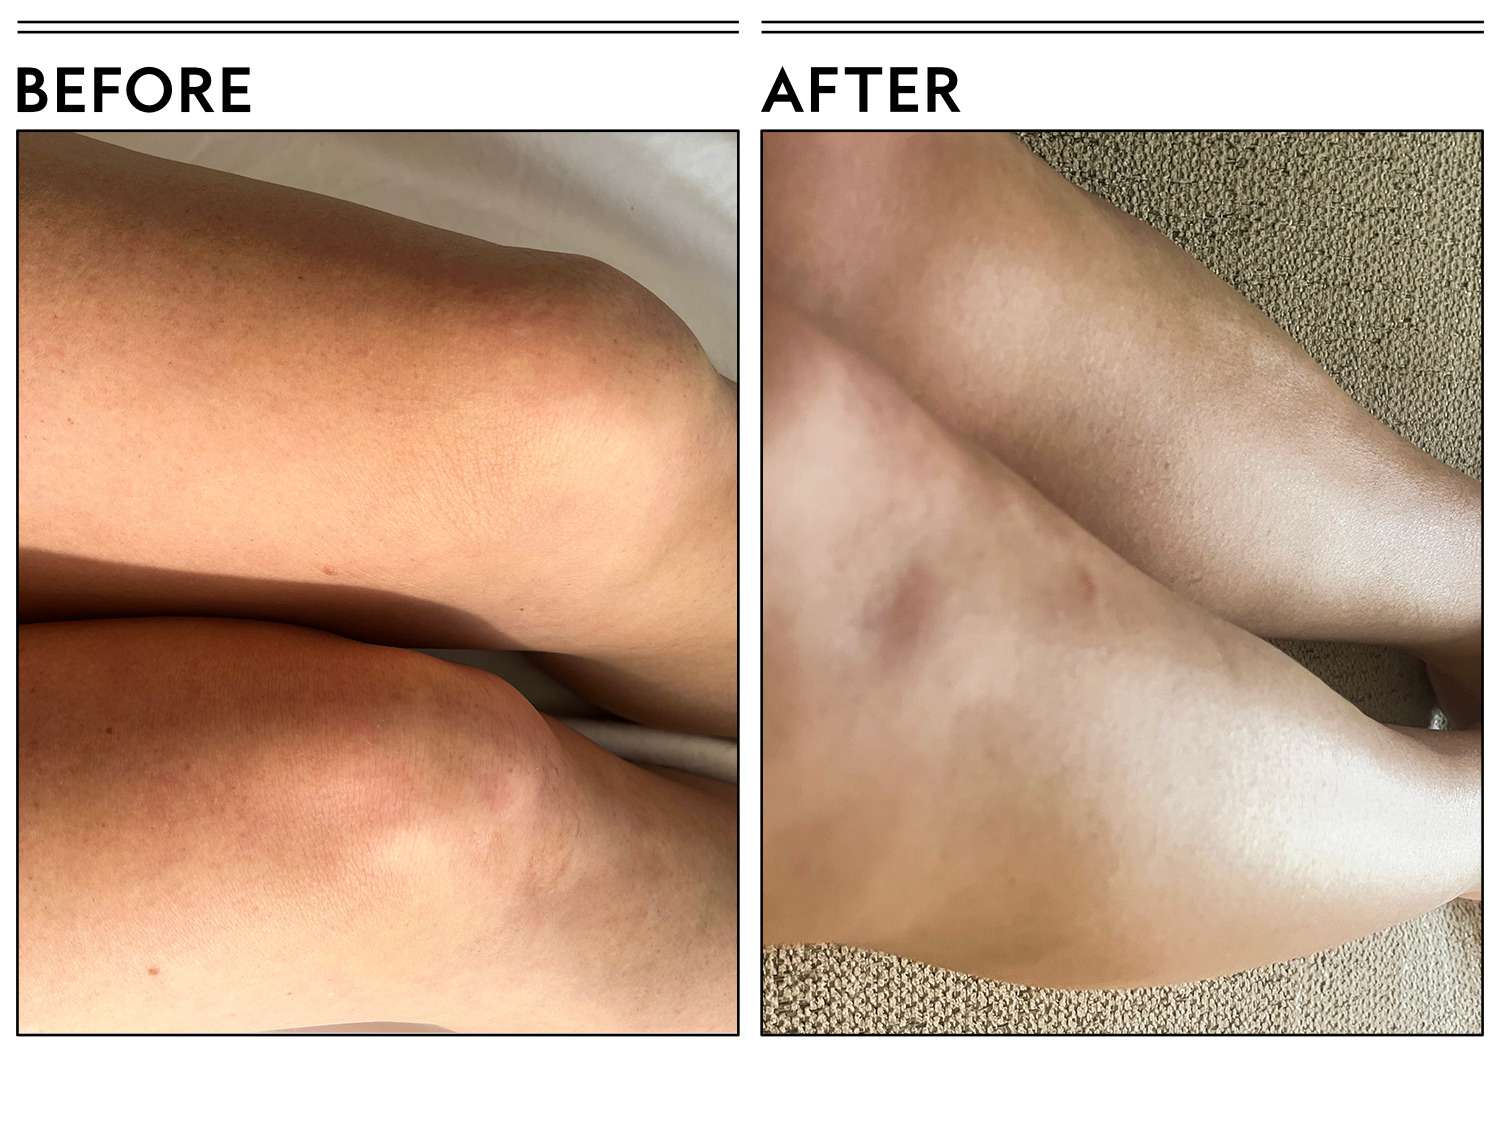 A before and after photo showing the effects of using Dermalogica Conditioning Body Wash on a person's legs